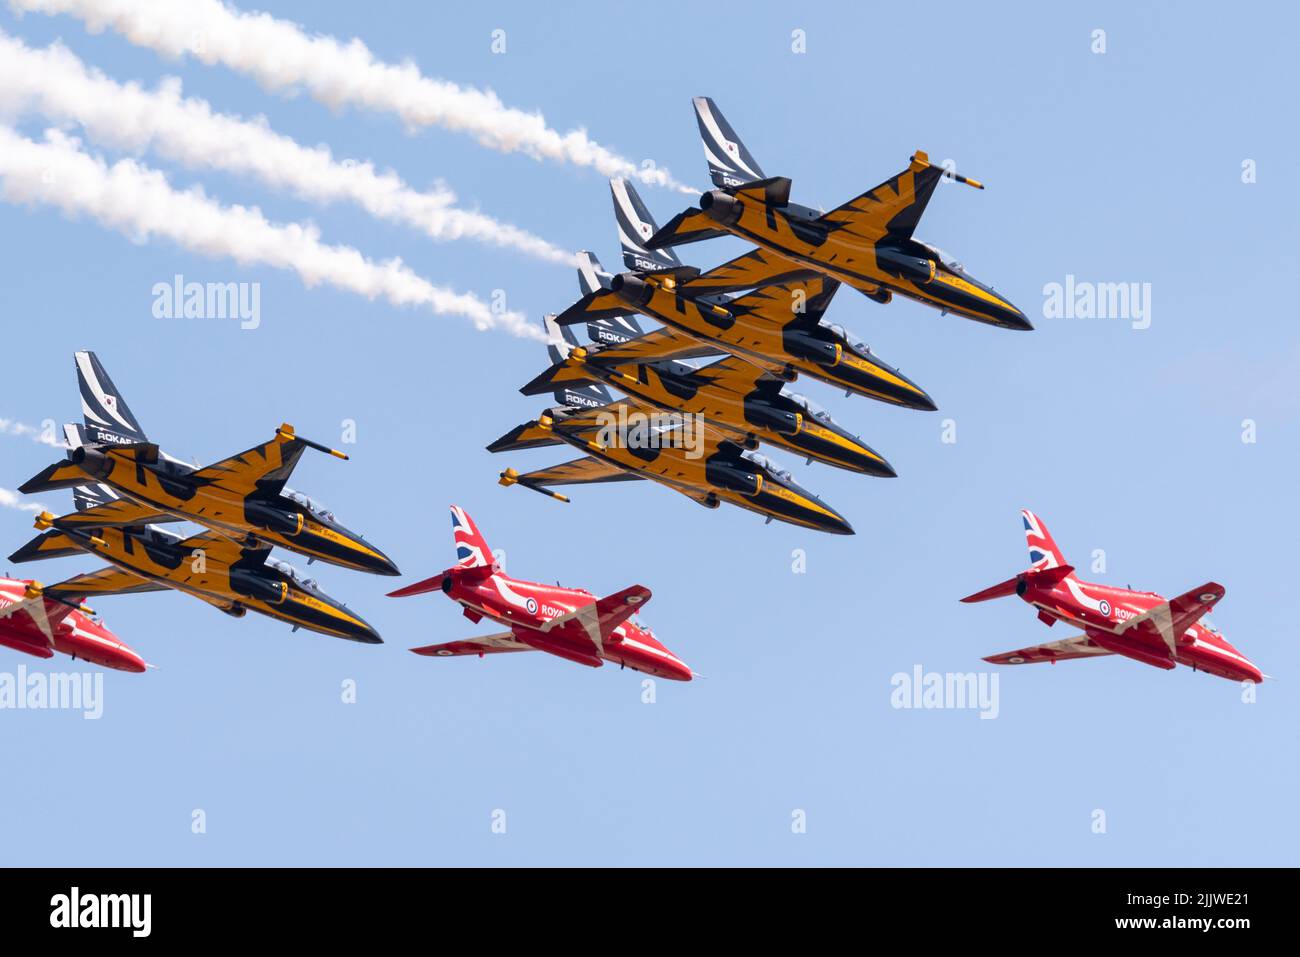 Royal Air Force Red Arrows display team flying at Royal International Air Tattoo airshow with Republic of Korea Black Eagles T-50 Golden Eagle jets Stock Photo